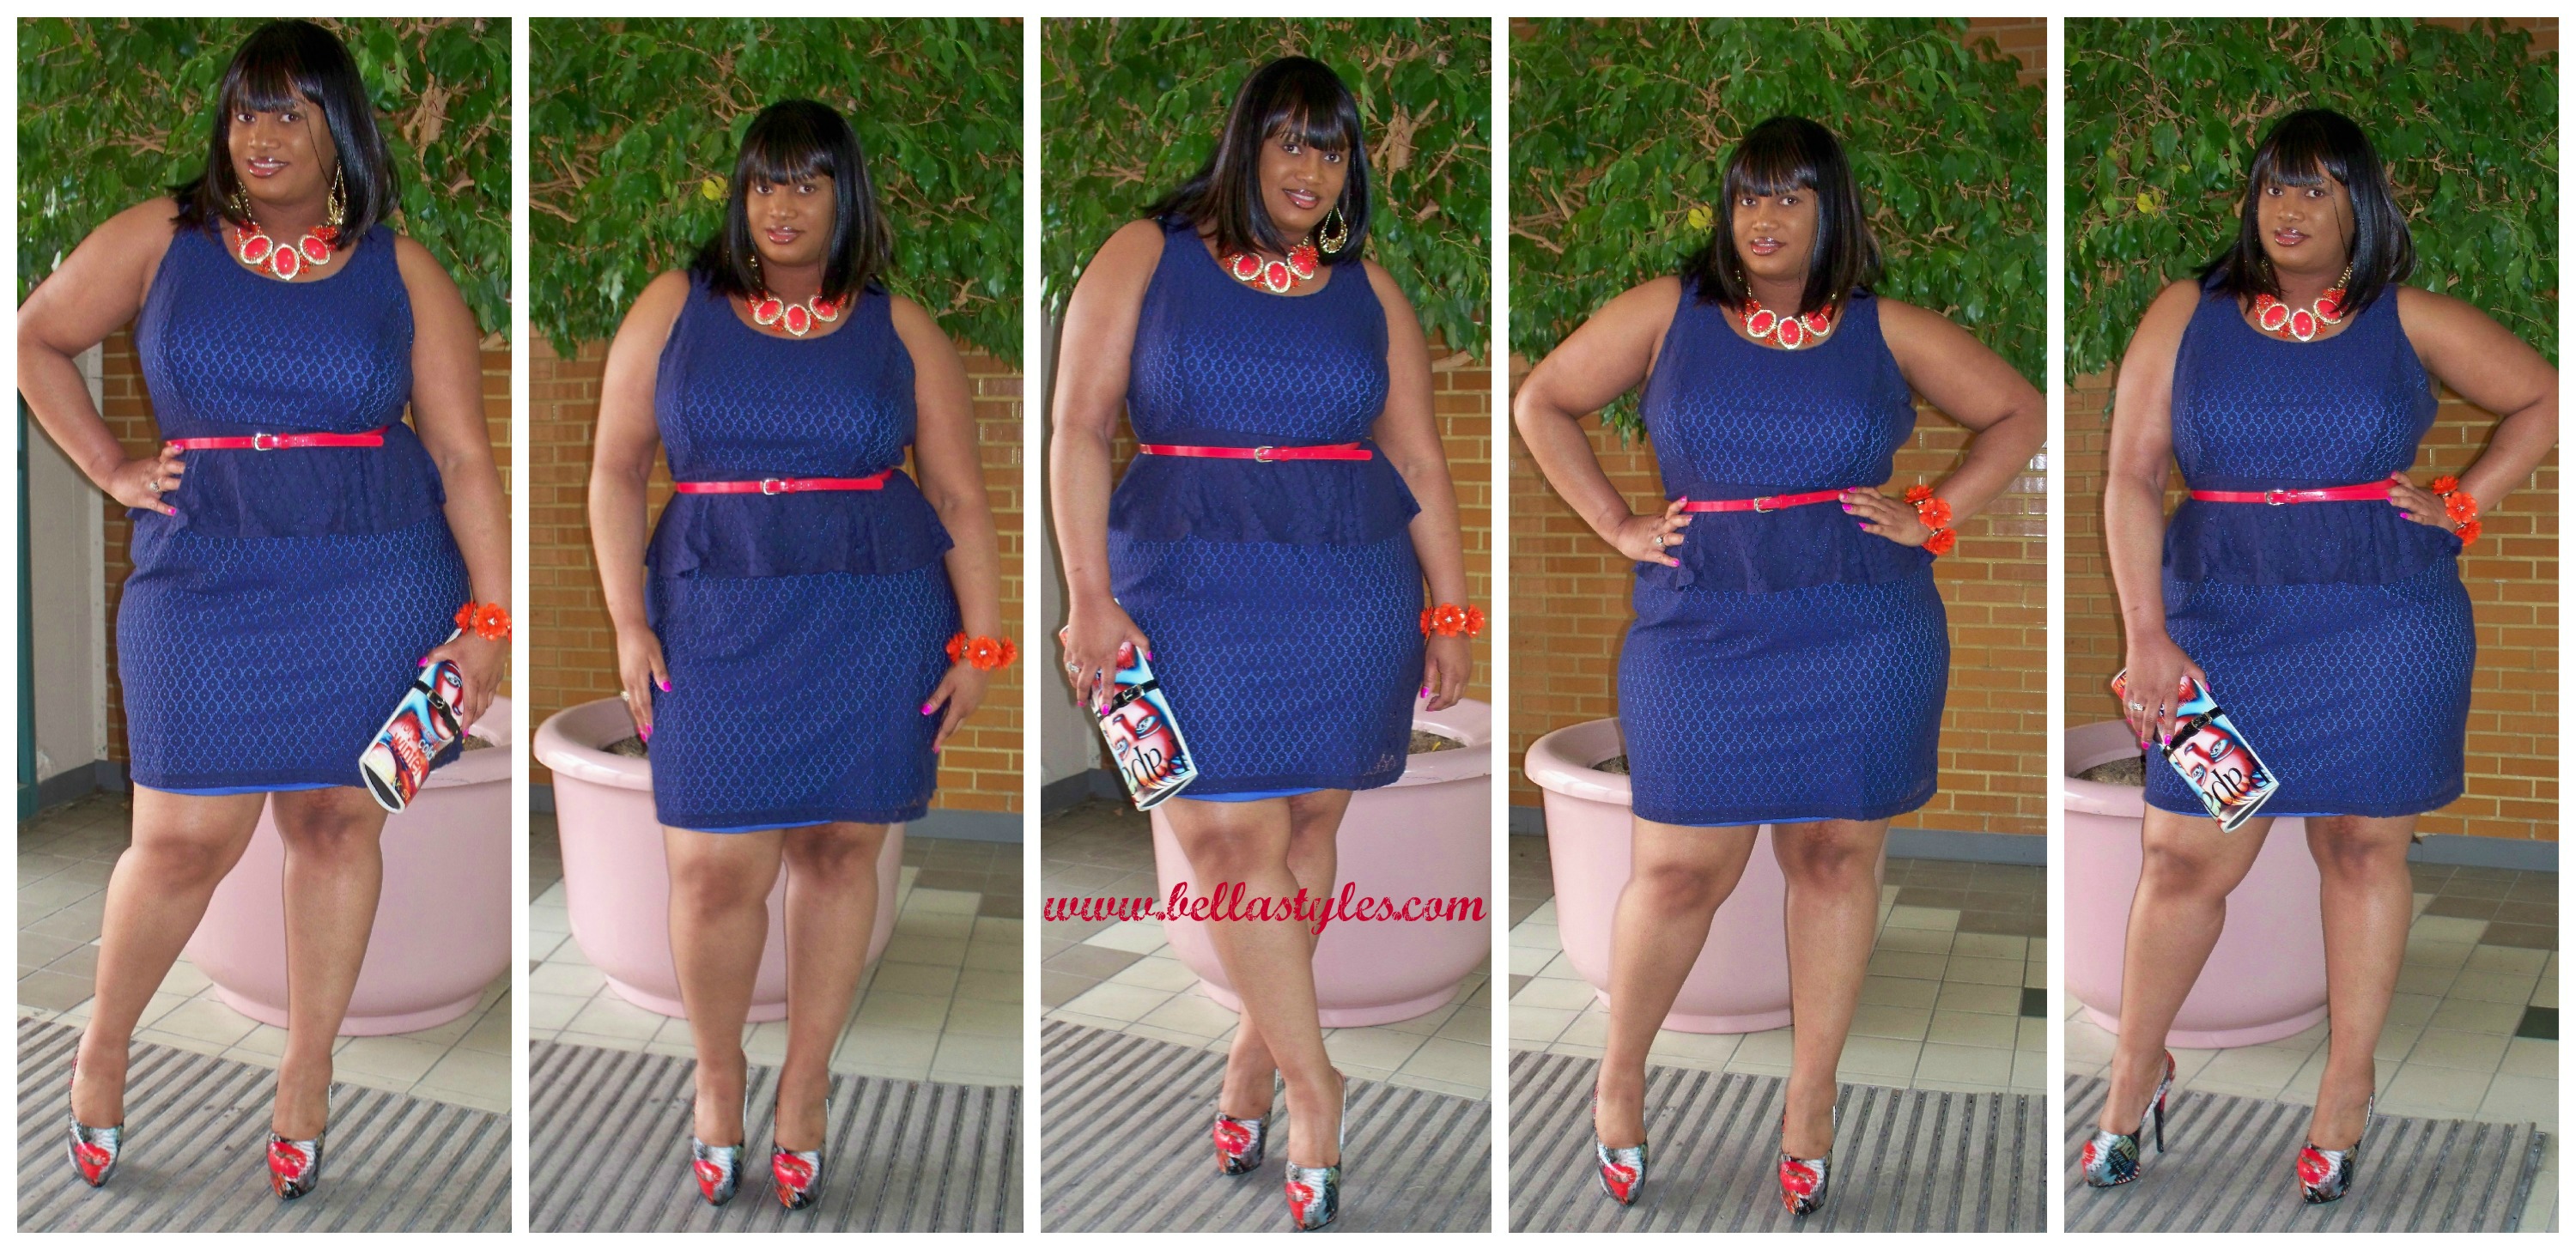 OOTD: “The Lane Bryant Fashion Style Off”